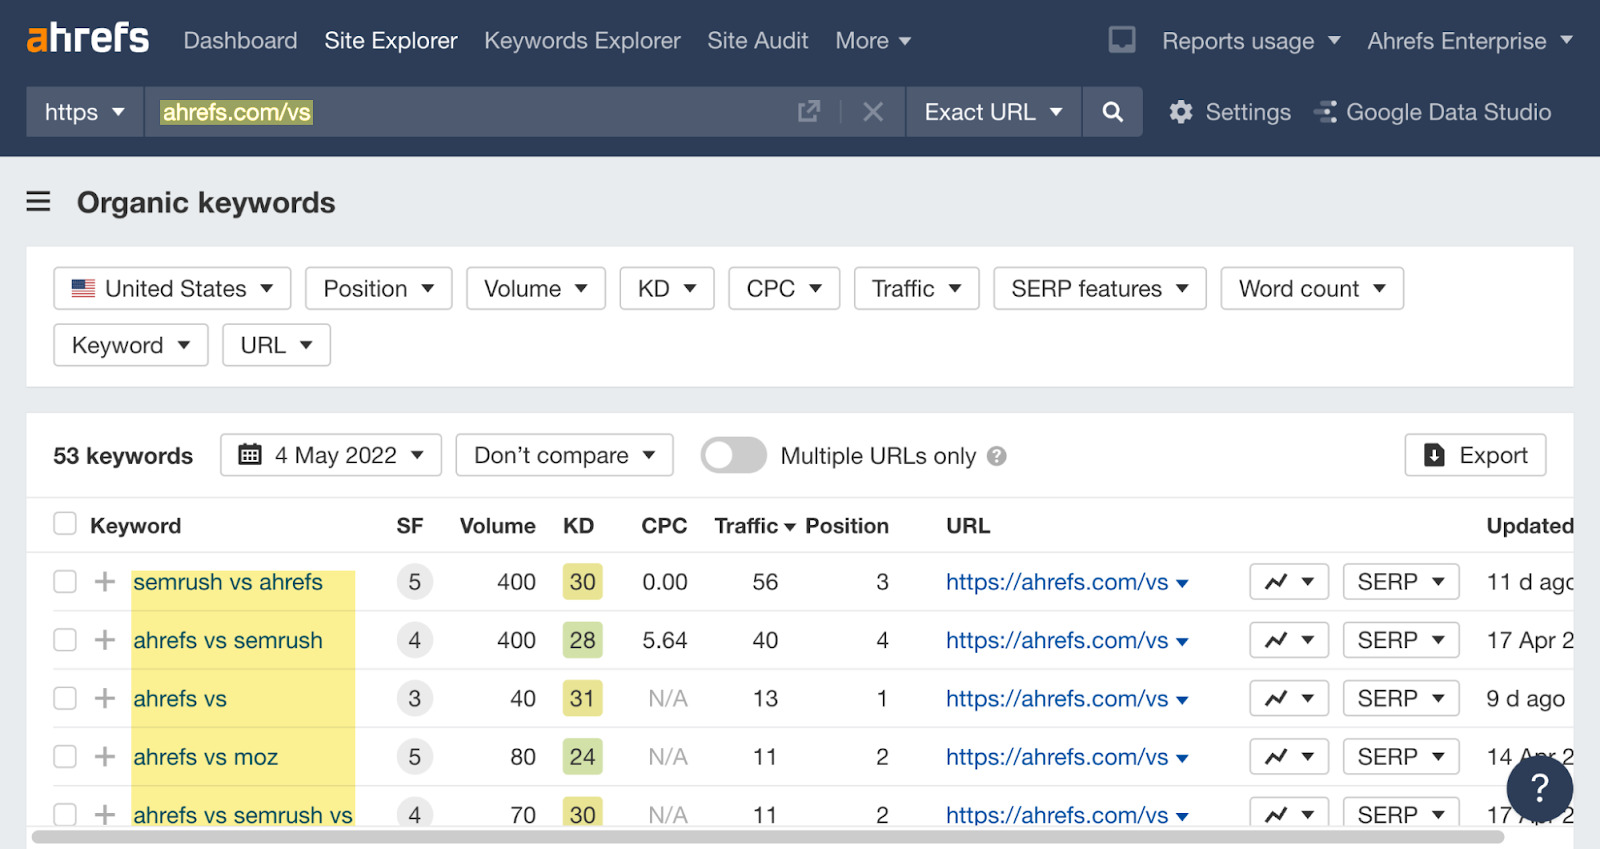 Organic keywords report results for Ahrefs' "versus" page